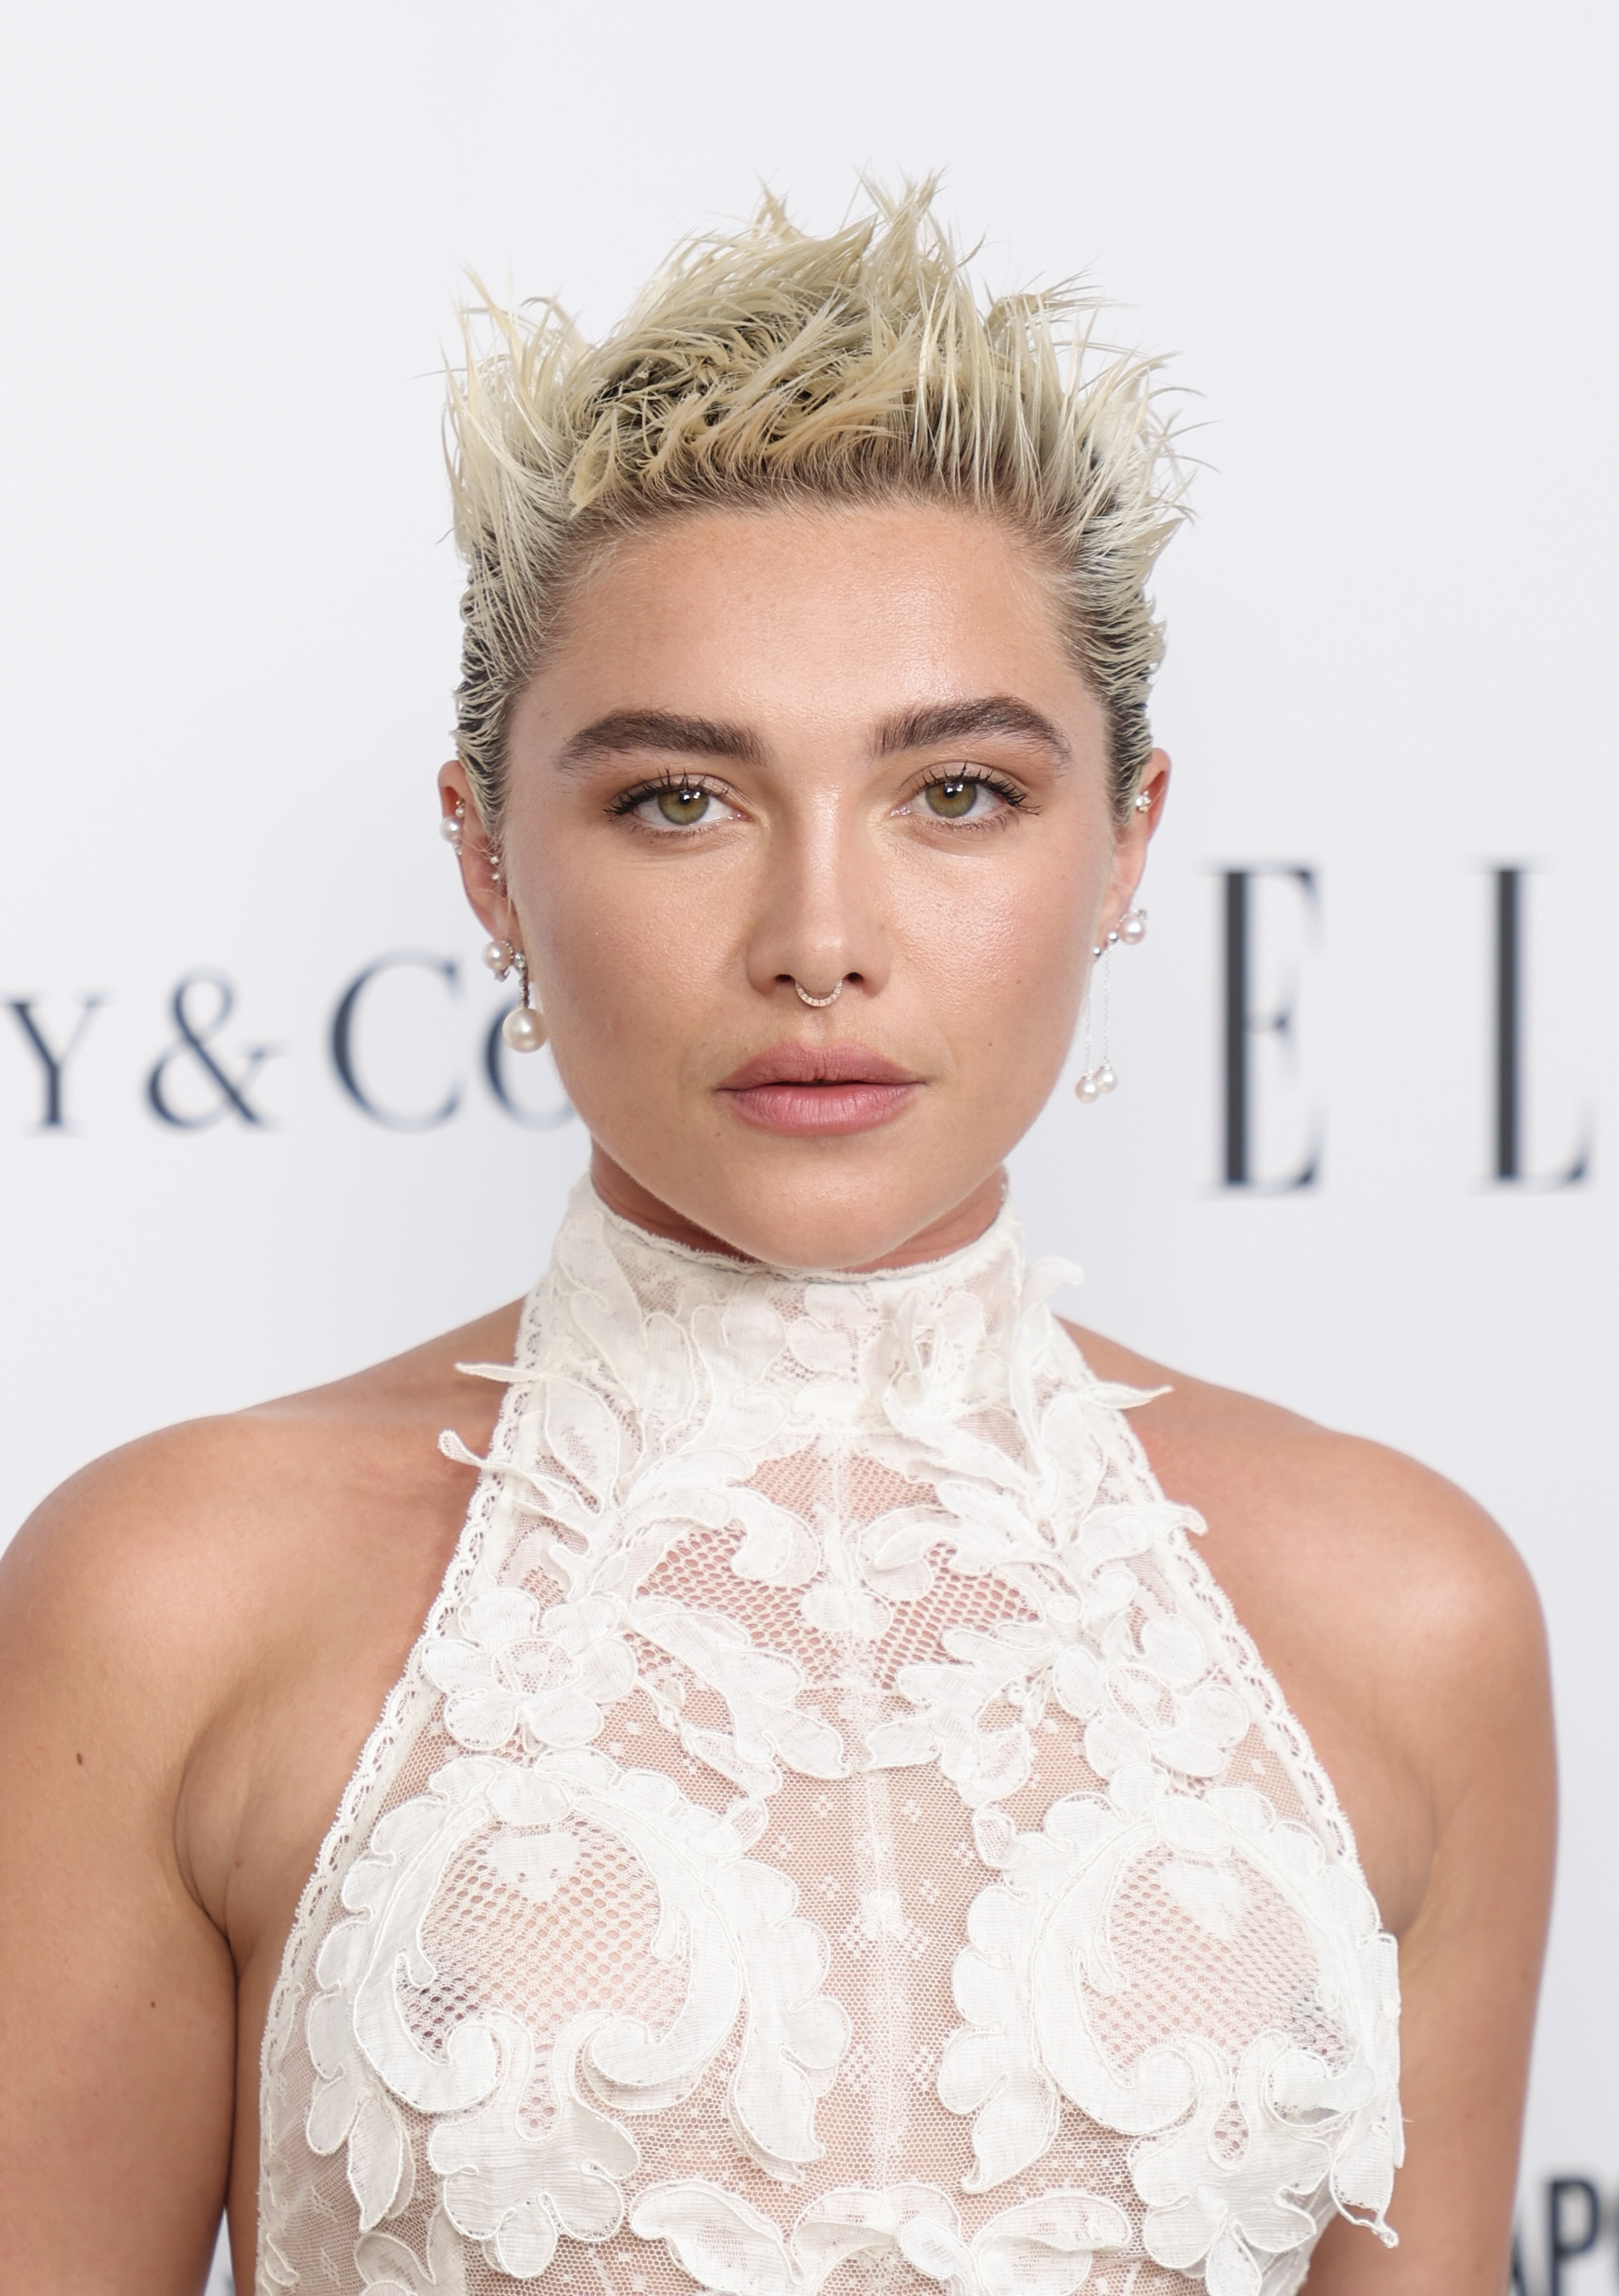 Close-up of Florence with spiked hair and wearing a lacy, sheer halter-top outfit at a media event